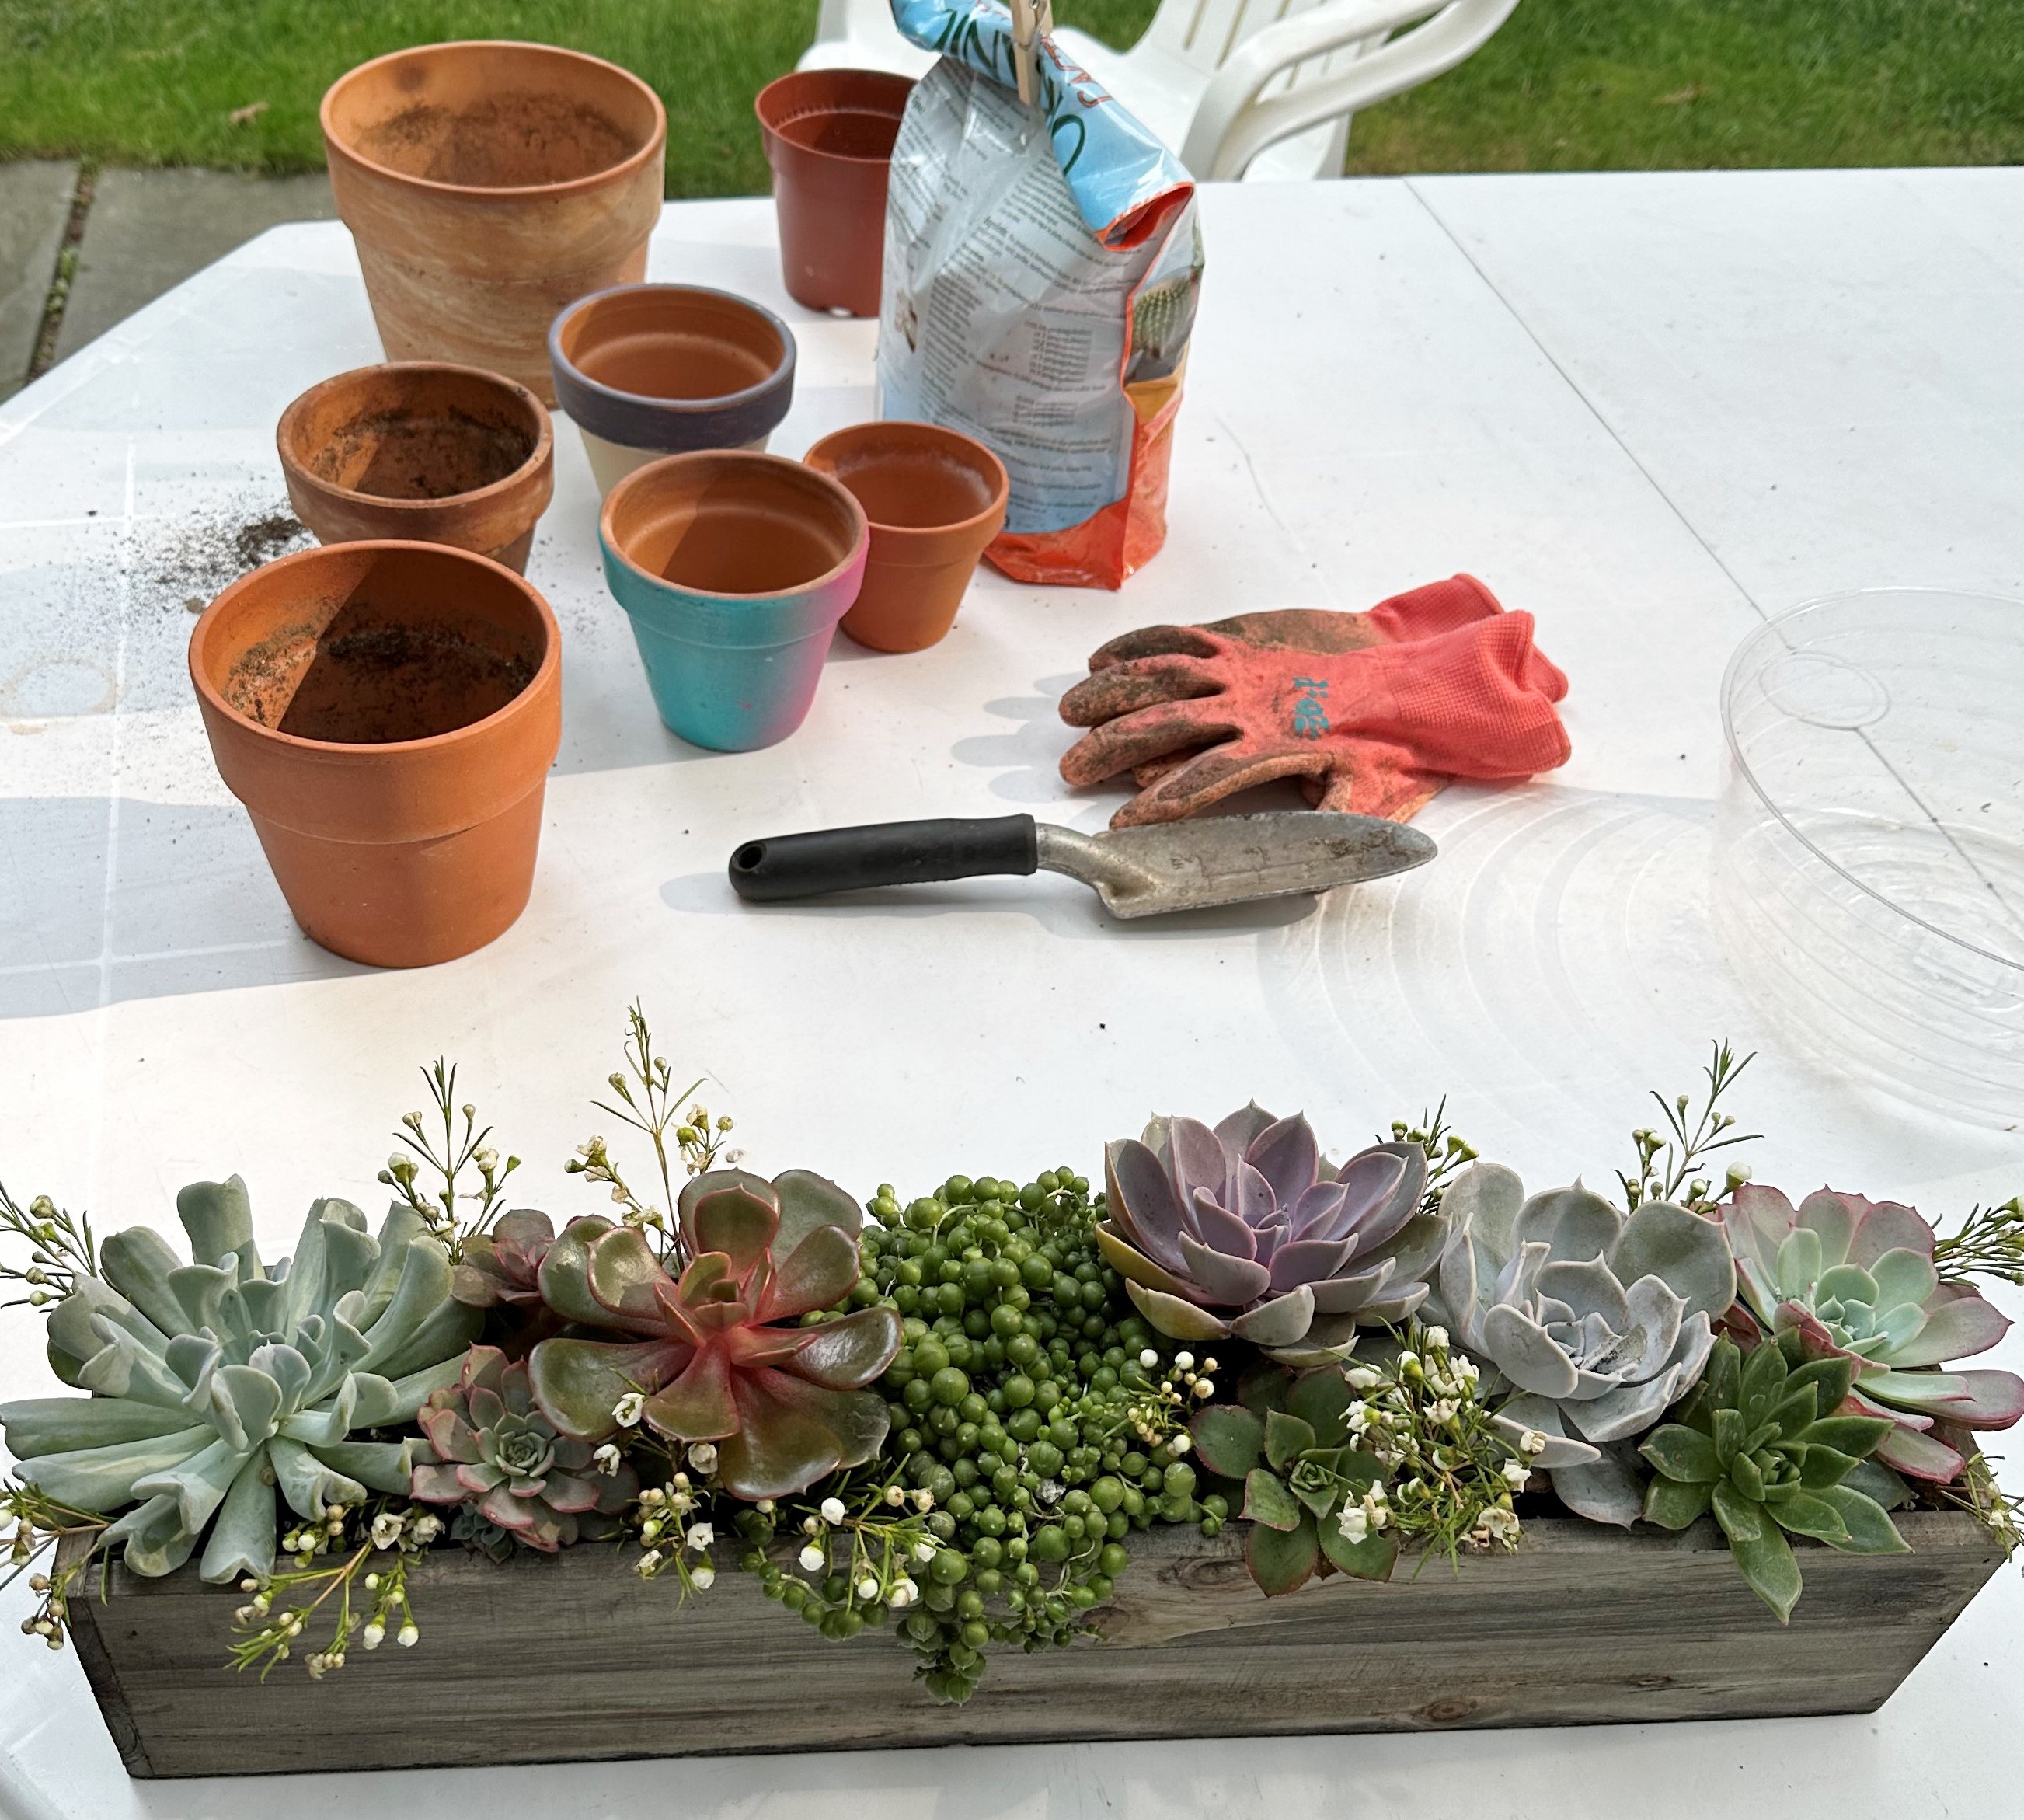 a boxed arrangement of various echeveria succulents and one hanging string-of-pearls succulent, sitting on a picnic table. Nearby are 7 empty plant pots, a bag of soil, and a trowel.